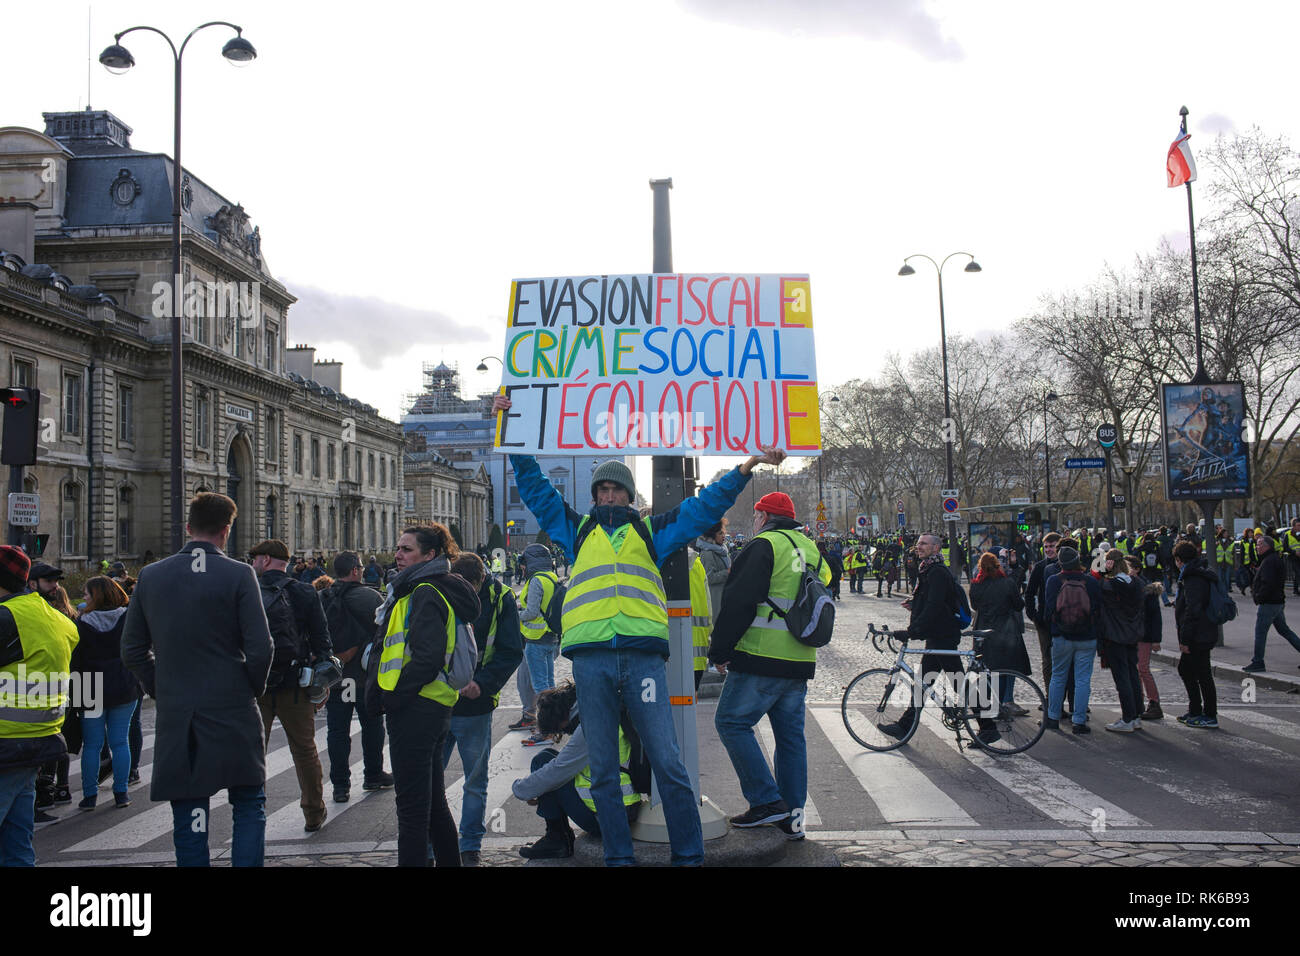 Paris, France. 09th Feb, 2019. Not paying fair taxes is a social and ecological crime, that's the sign written here Credit: Roger Ankri/Alamy Live News Stock Photo